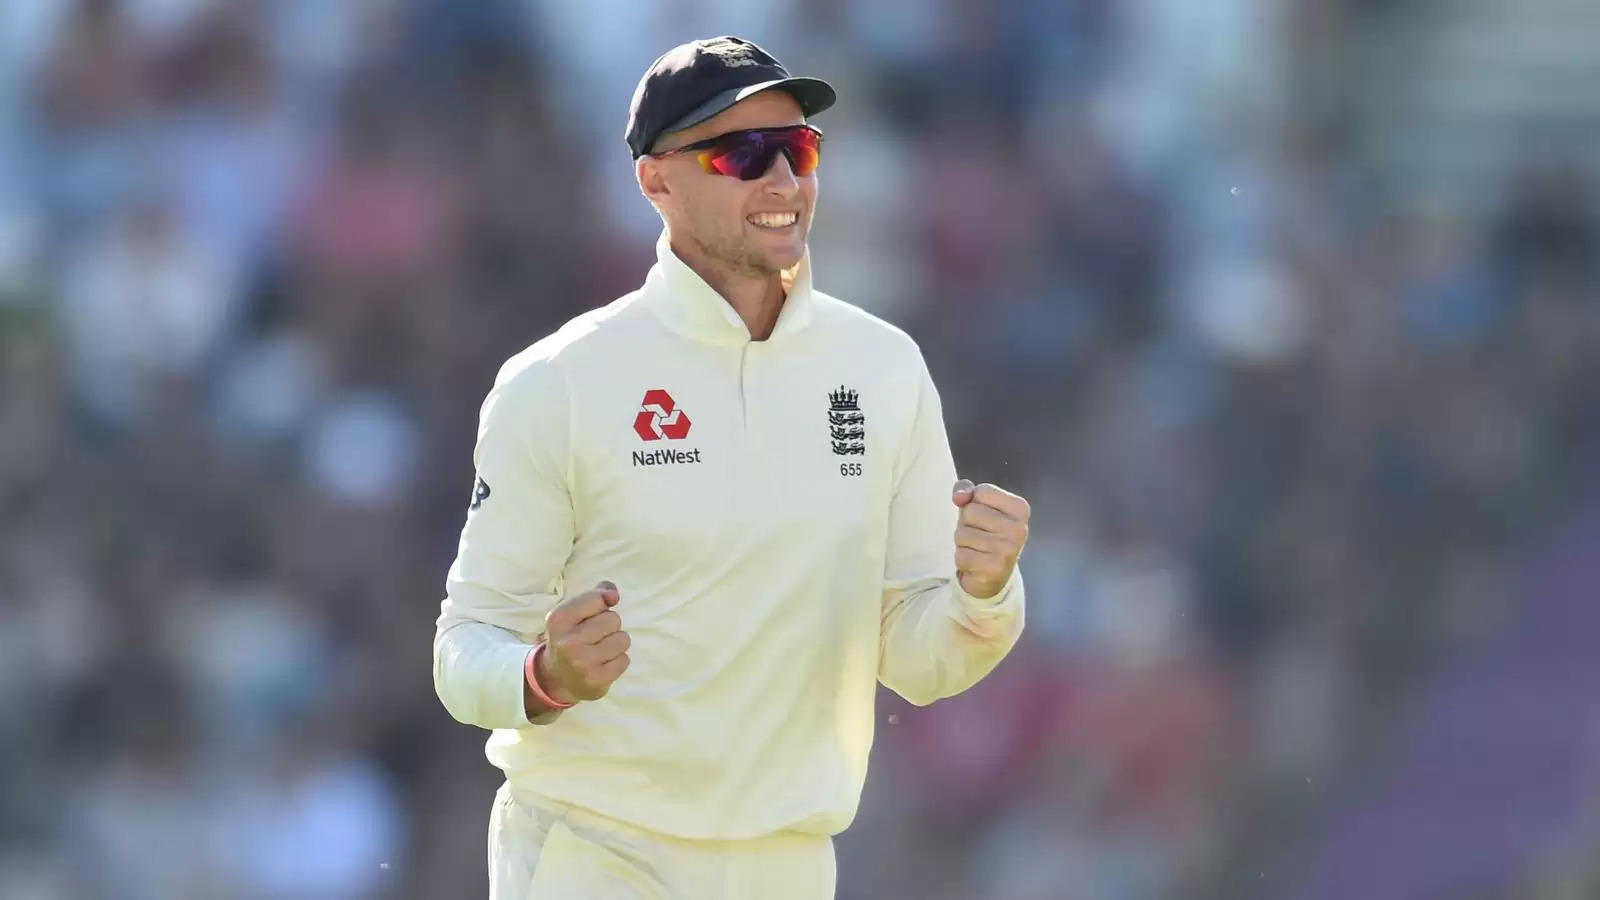 England v West Indies: Can Joe Root rekindle his lost mojo in Test Cricket in this English summer?